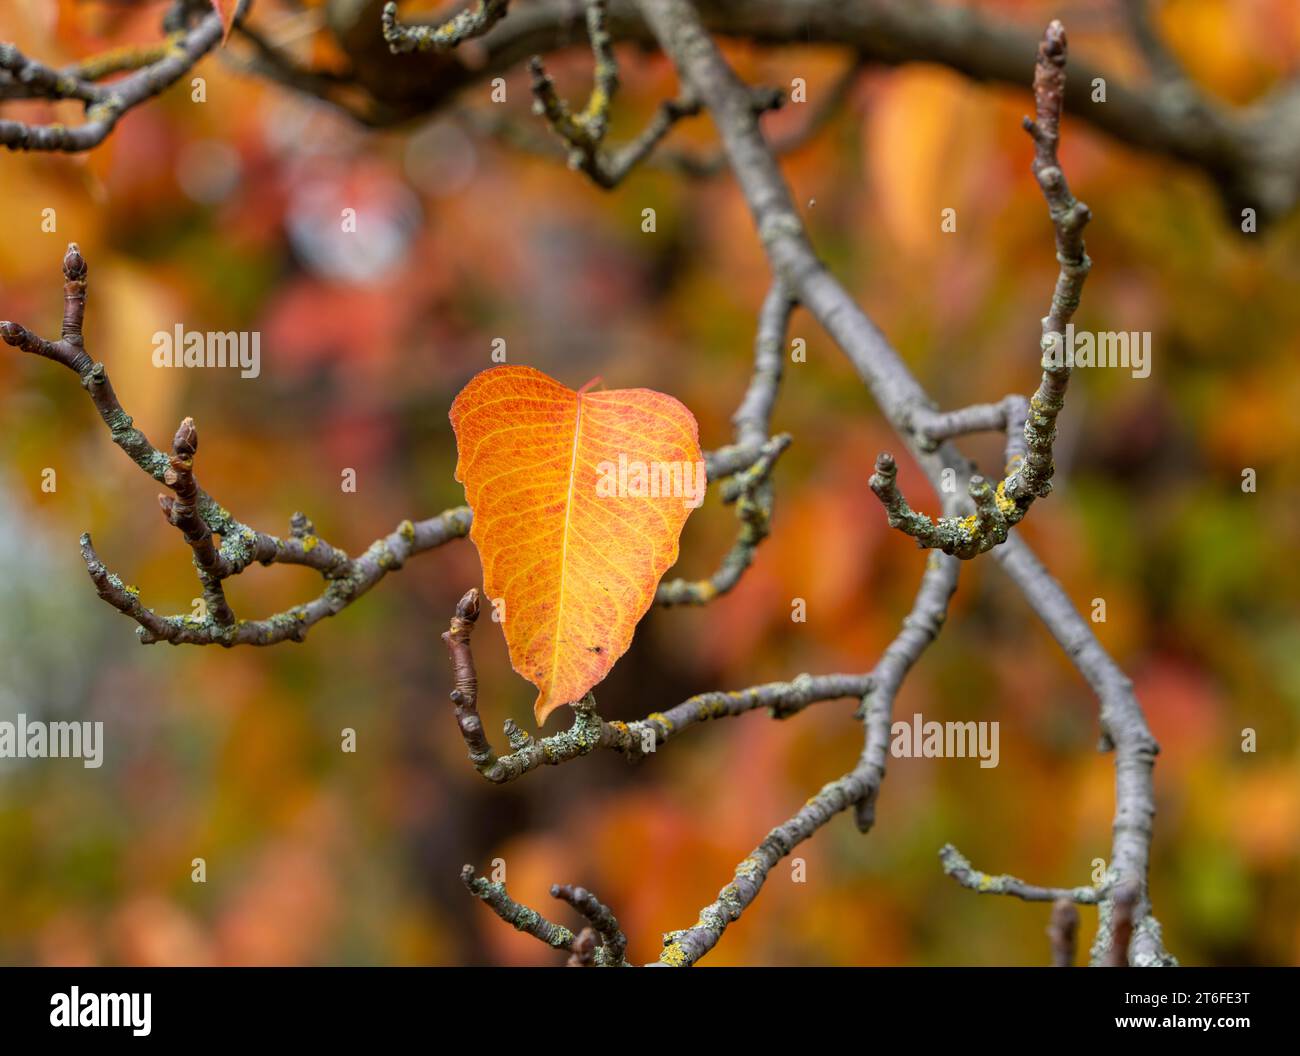 Autumn time, Sapium Plantae, trees and foliage in the park, Berlin, Germany Stock Photo